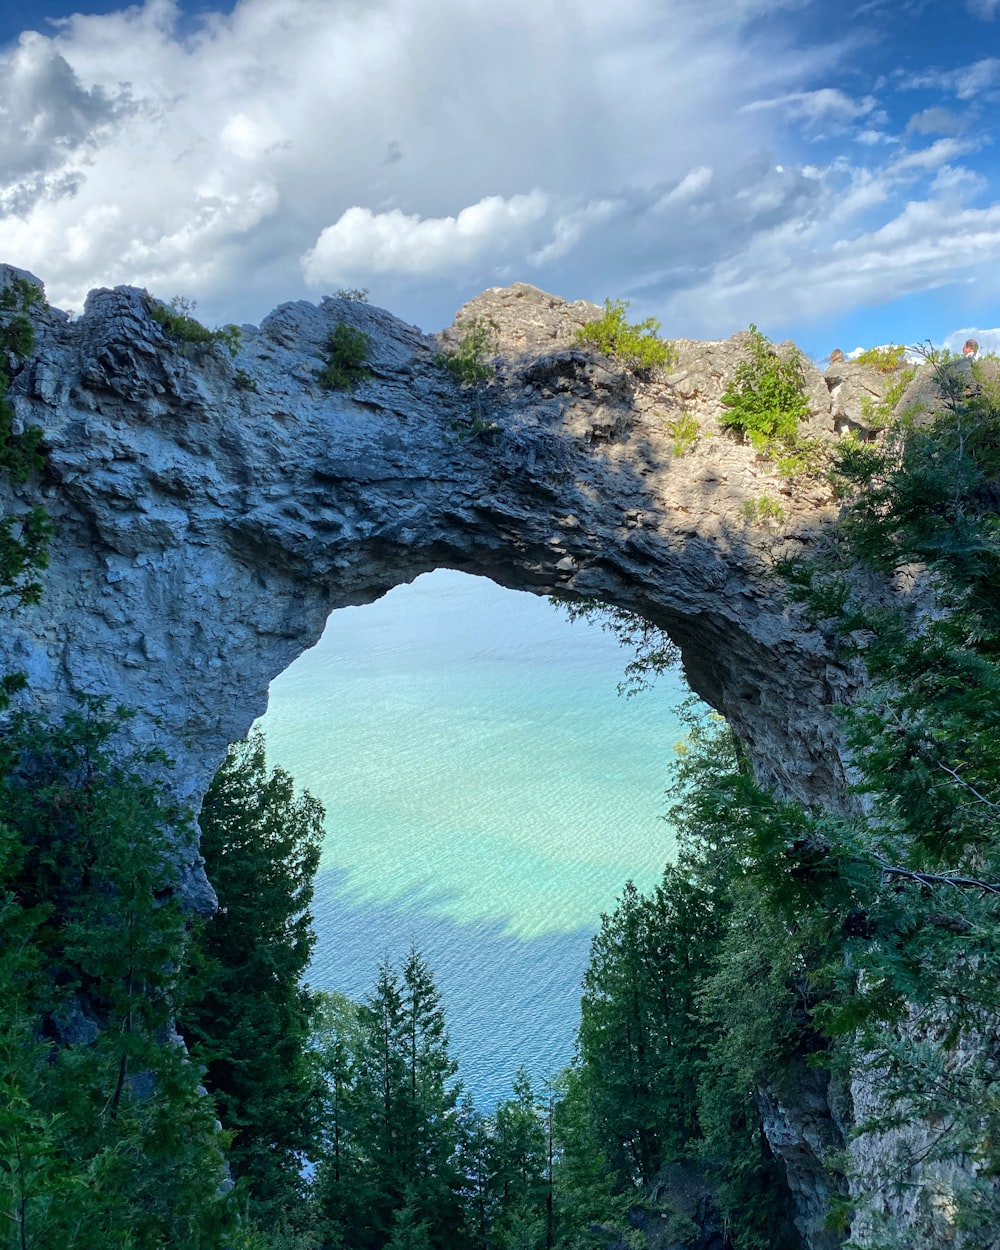 a large rock arch over looking a body of water